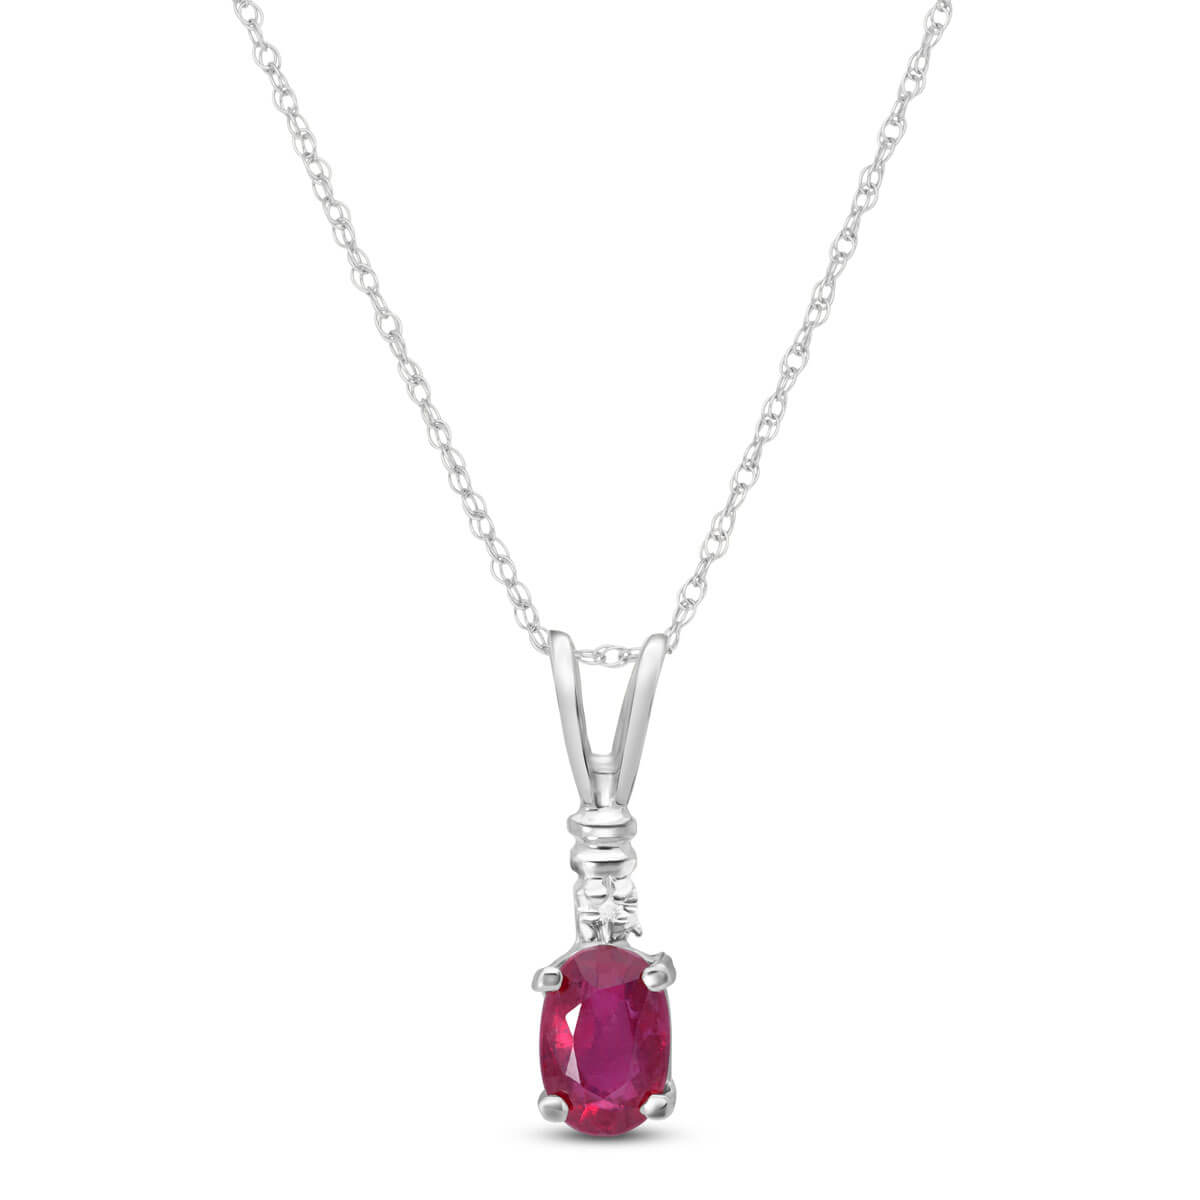 Ruby & Diamond Cap Oval Pendant Necklace in 9ct White Gold